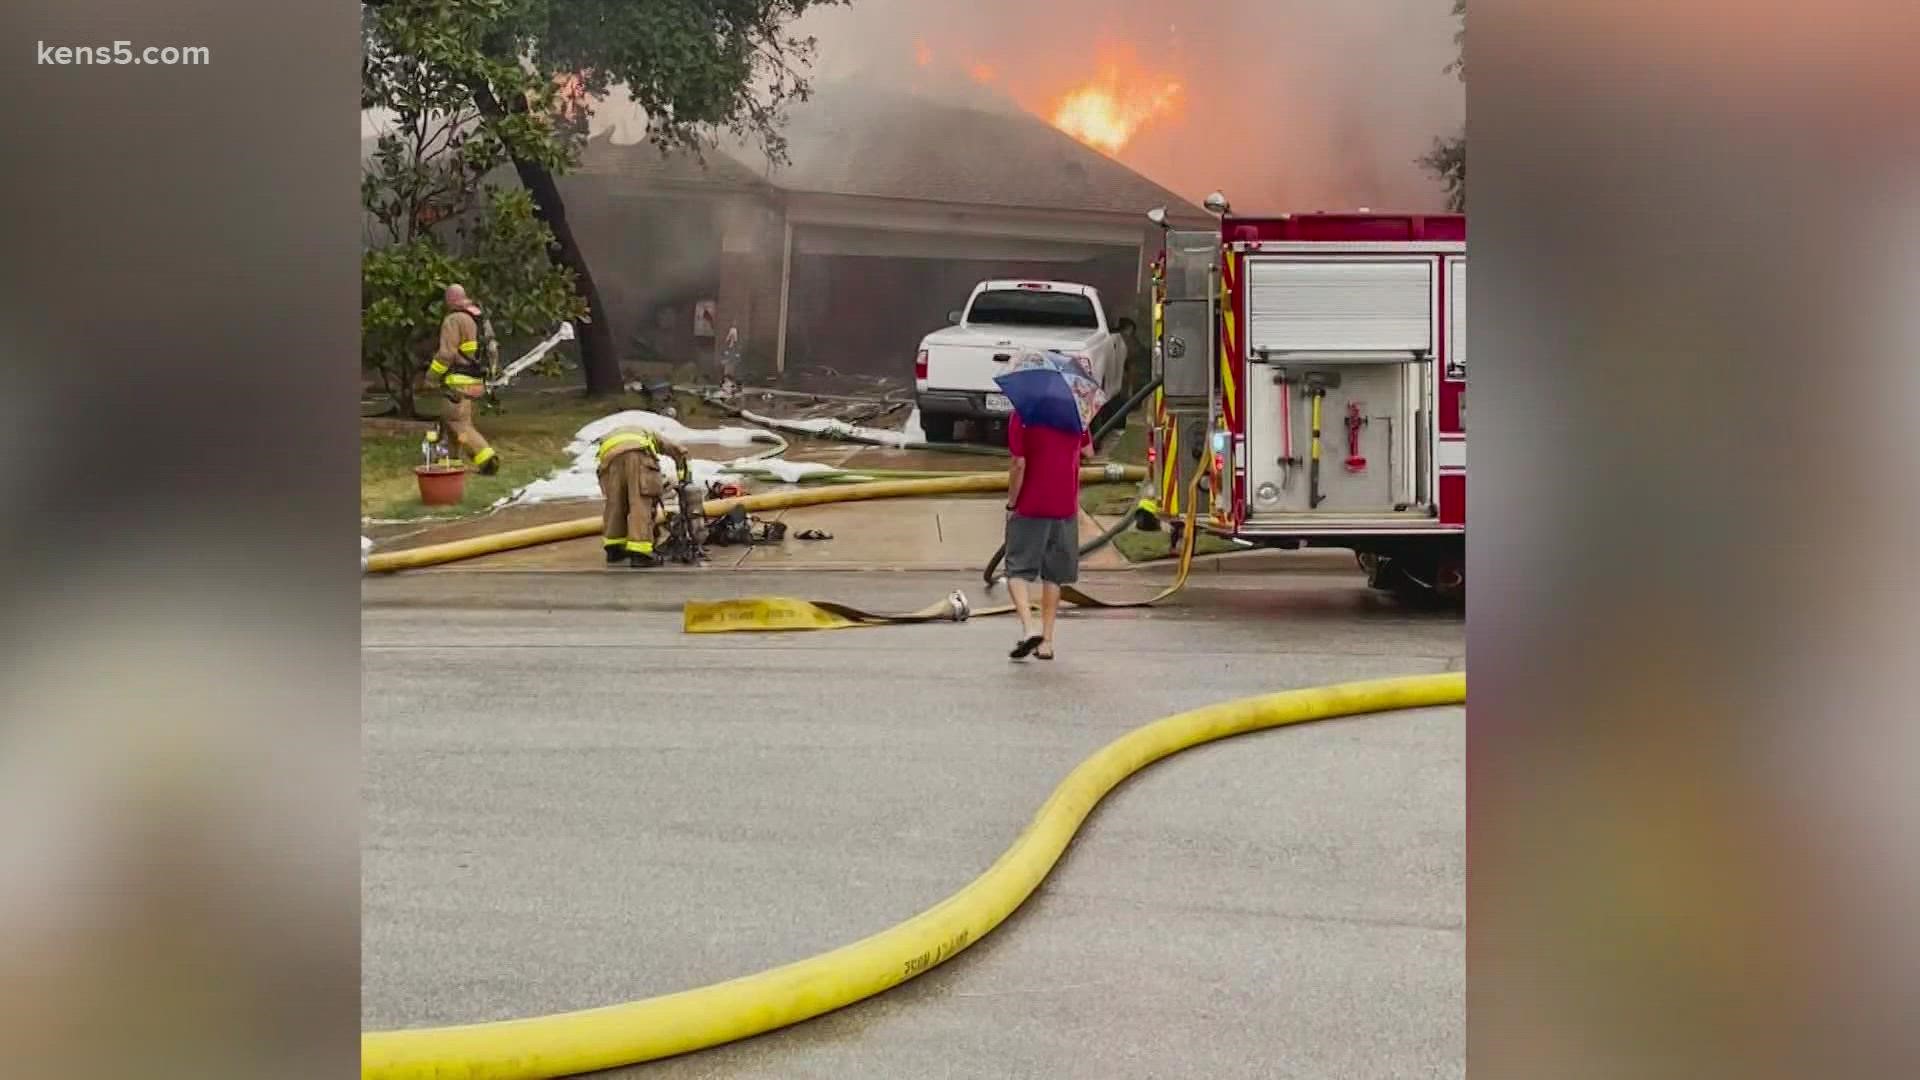 San Antonio Fire Department officials said a lightning strike caused the fire at the home off Bercy Court.